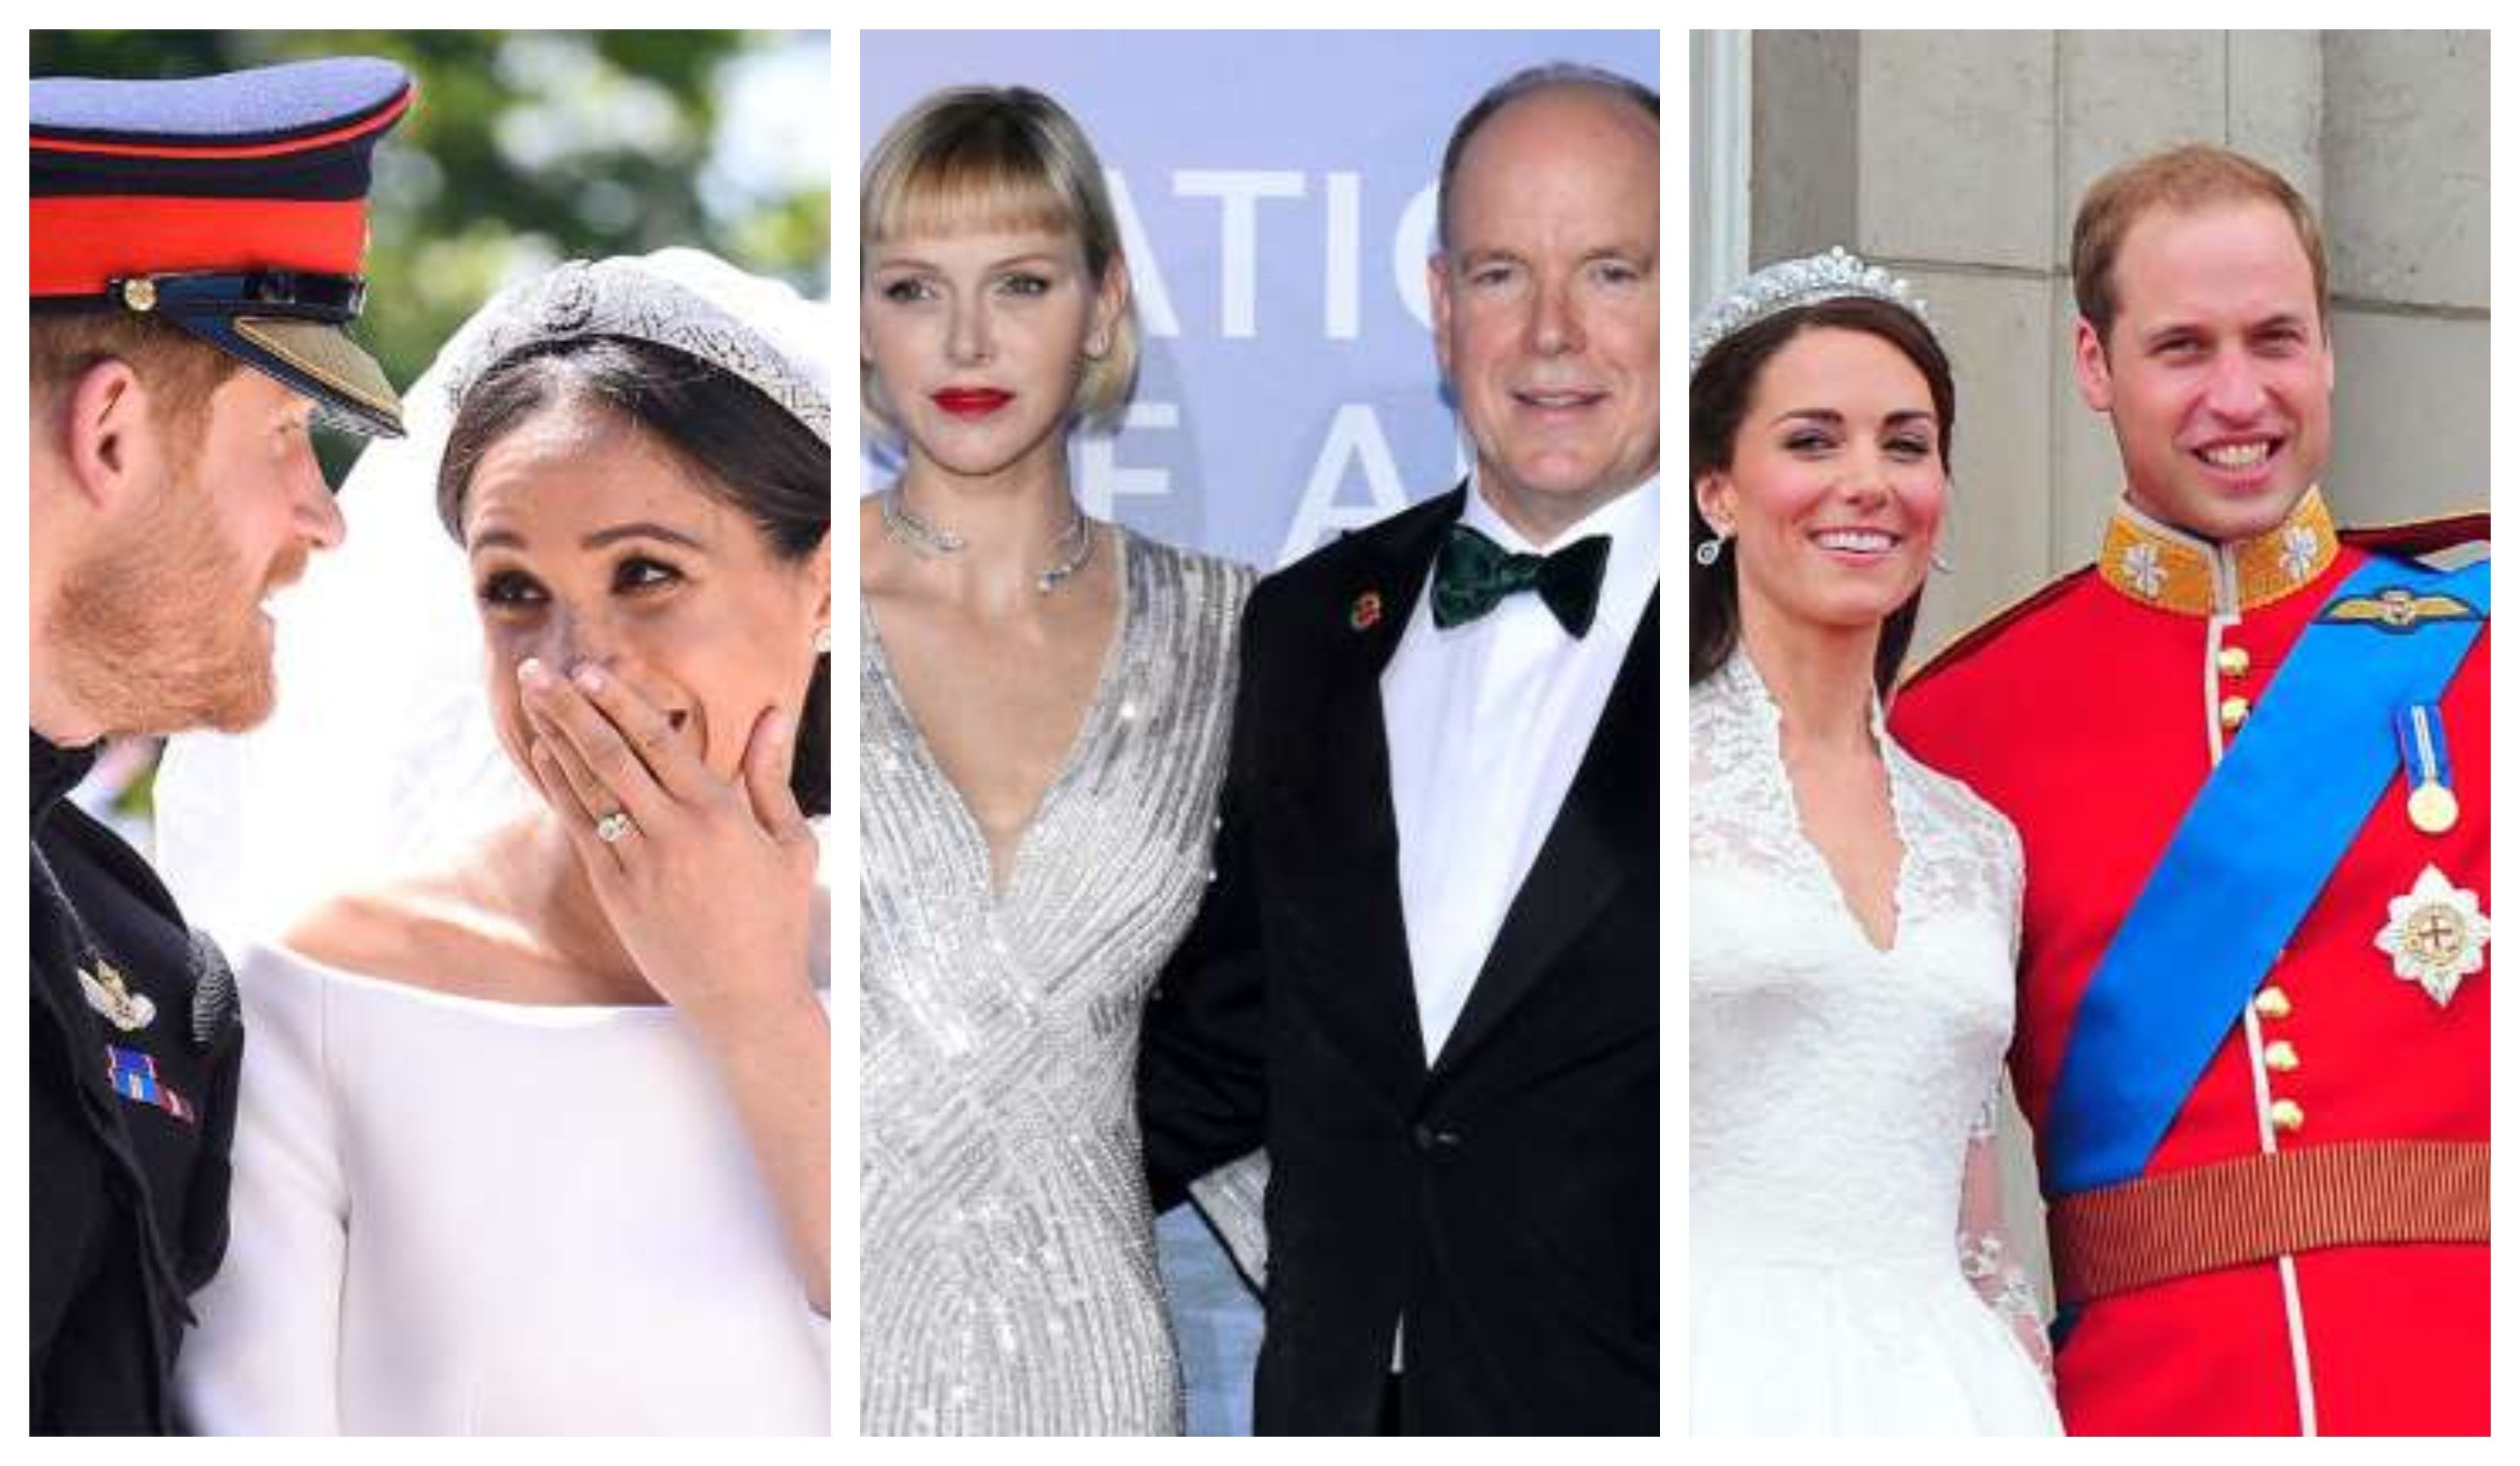 10 commoners who wed royals Meghan image